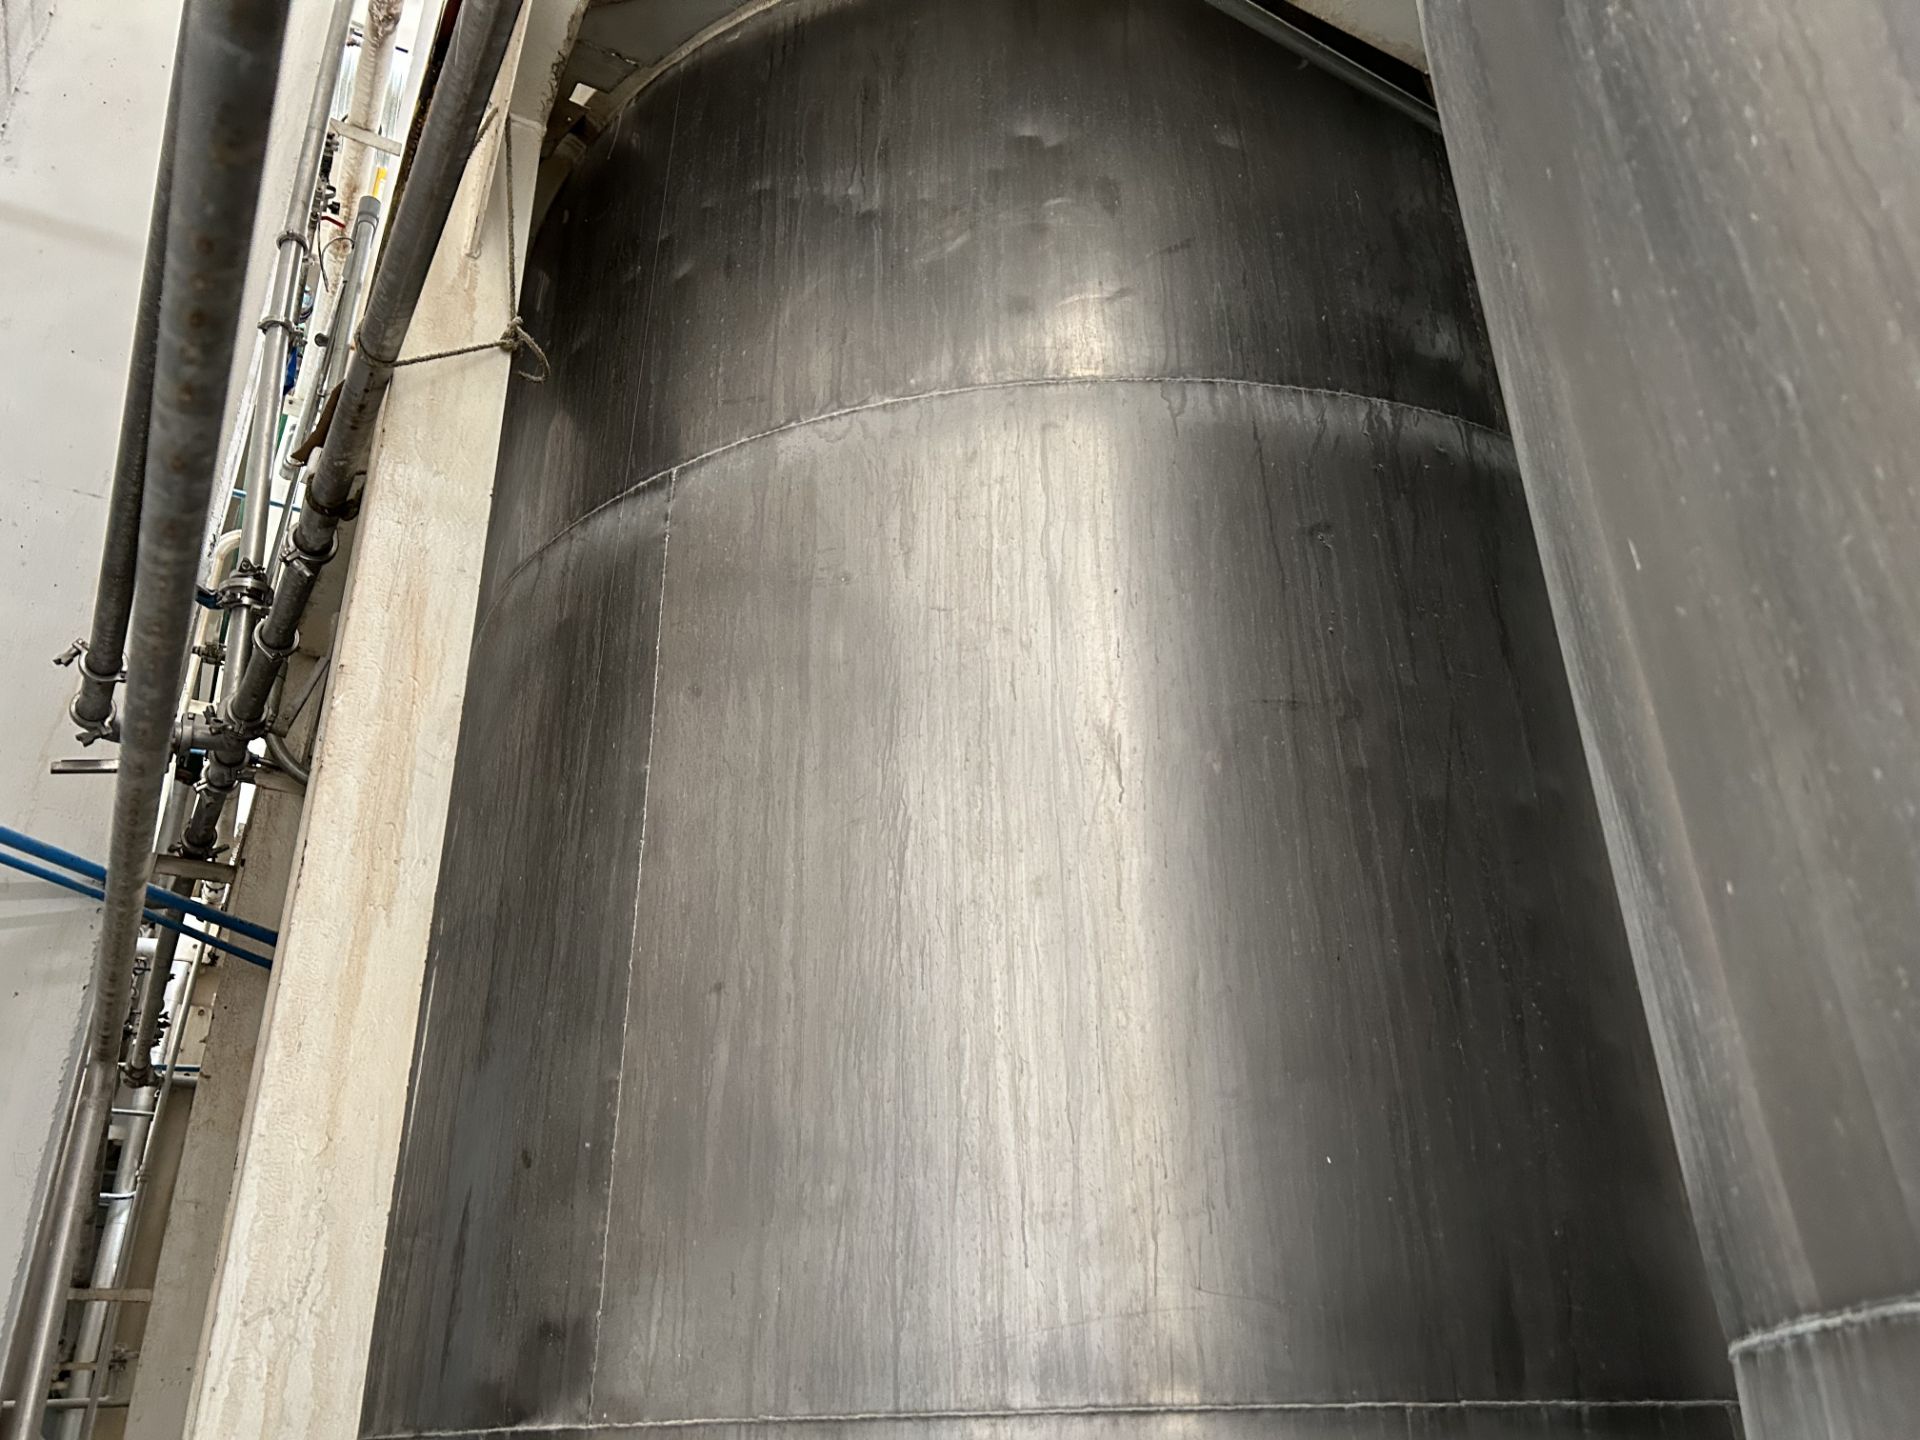 AISI-304 stainless steel tank with a capacity of 20, 800 L; Dimensions: Height: 4.88 m, Diameter: 2 - Image 5 of 14